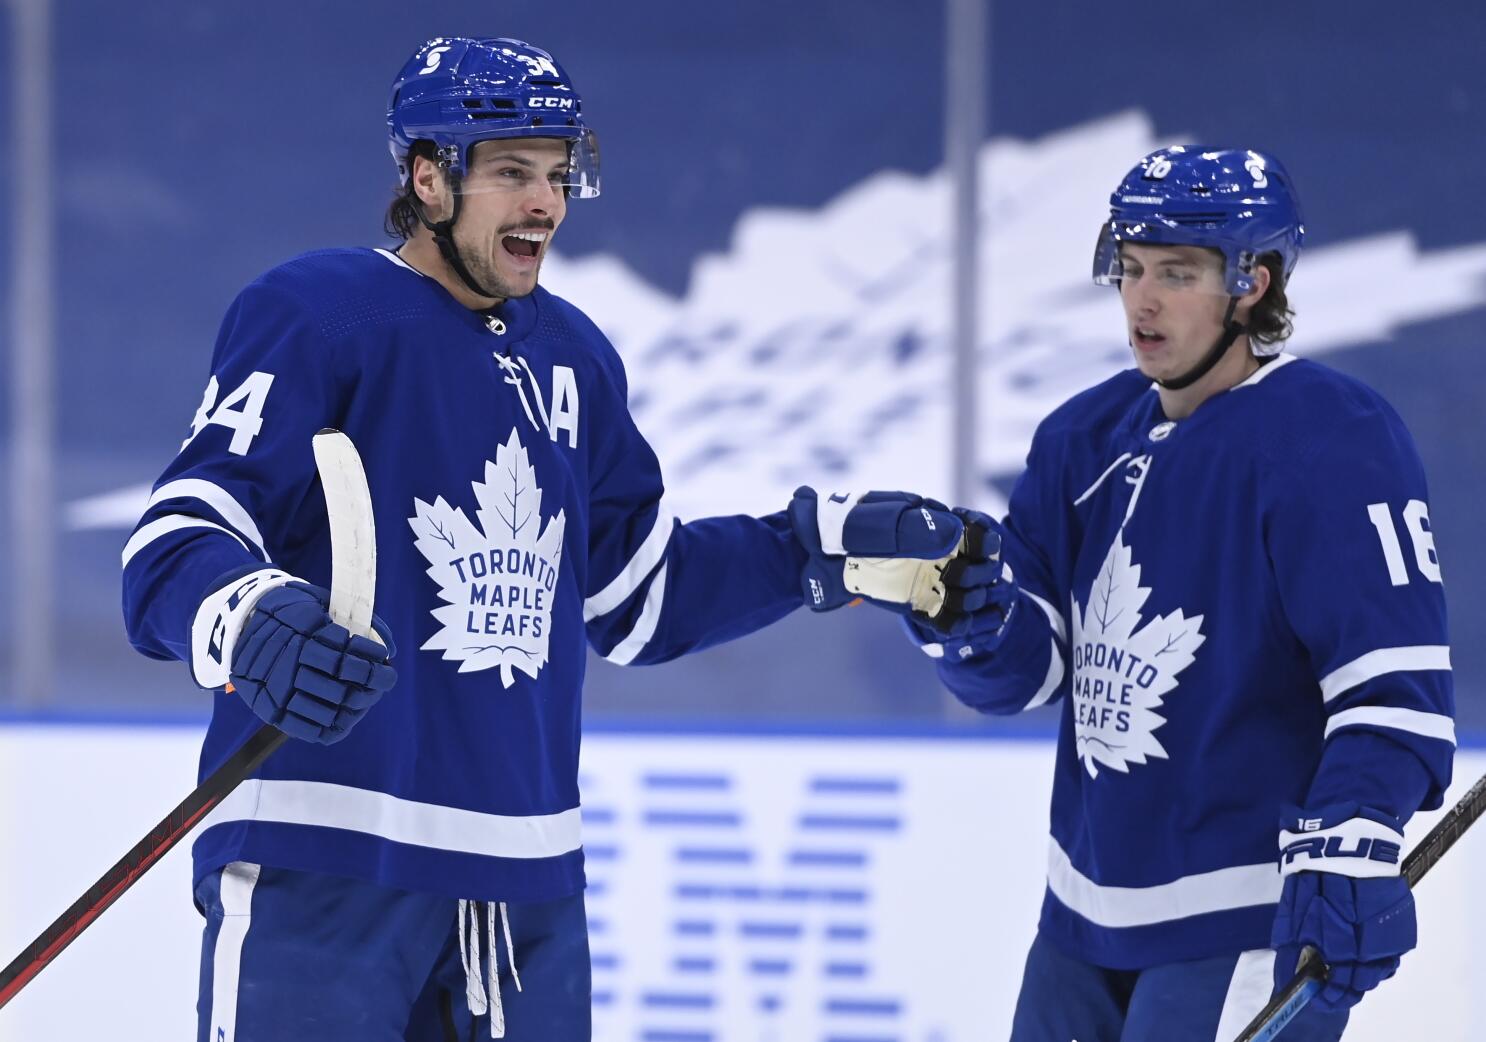 Matthews helps Maple Leafs roll past Canadiens in Game 2 to even series